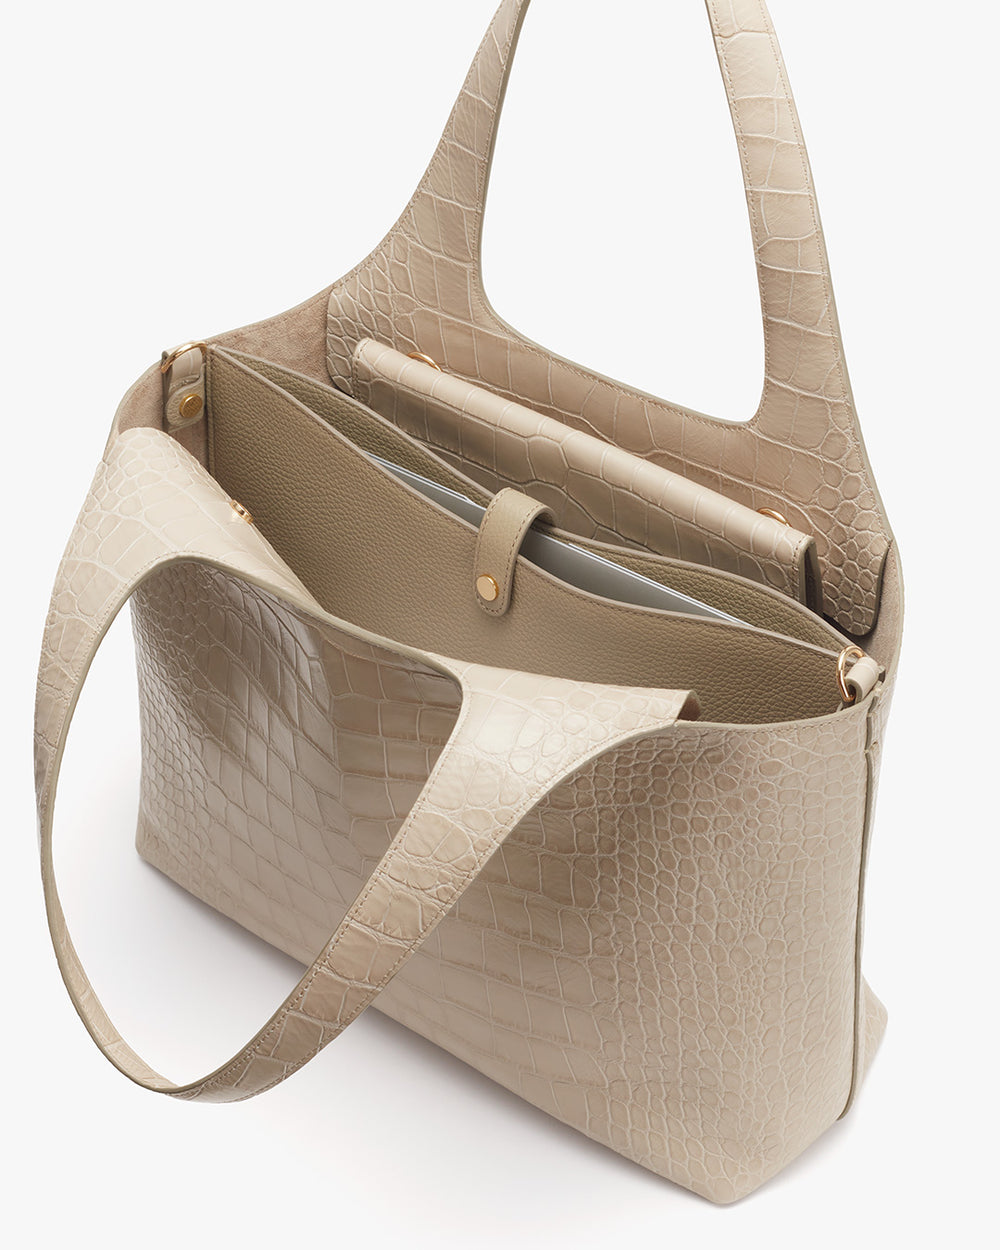 Open handbag with visible interior compartments and a top handle